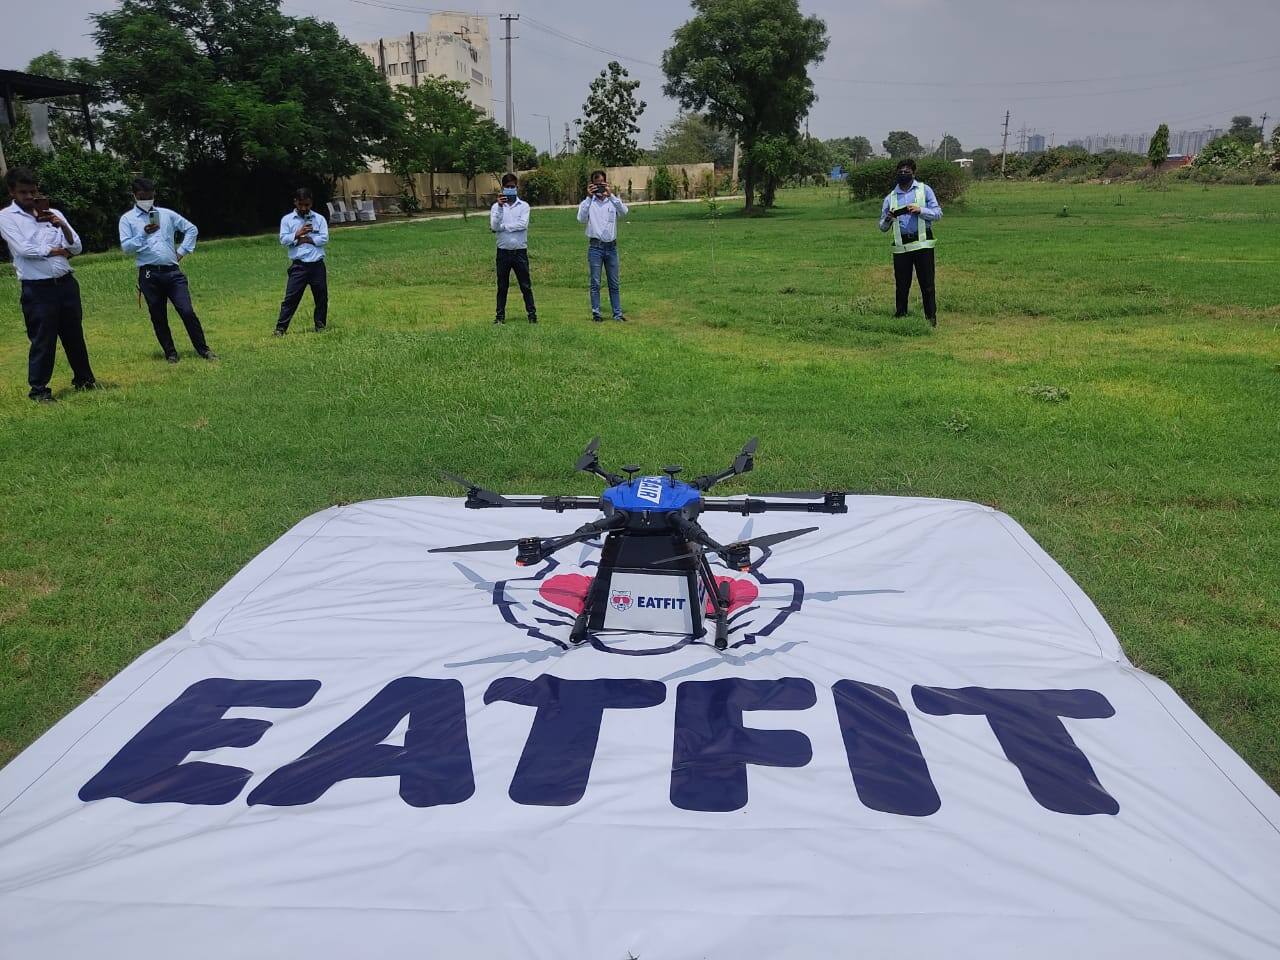 Skye Air Mobility delivers frozen food for Curefoods in Gurgaon using drones